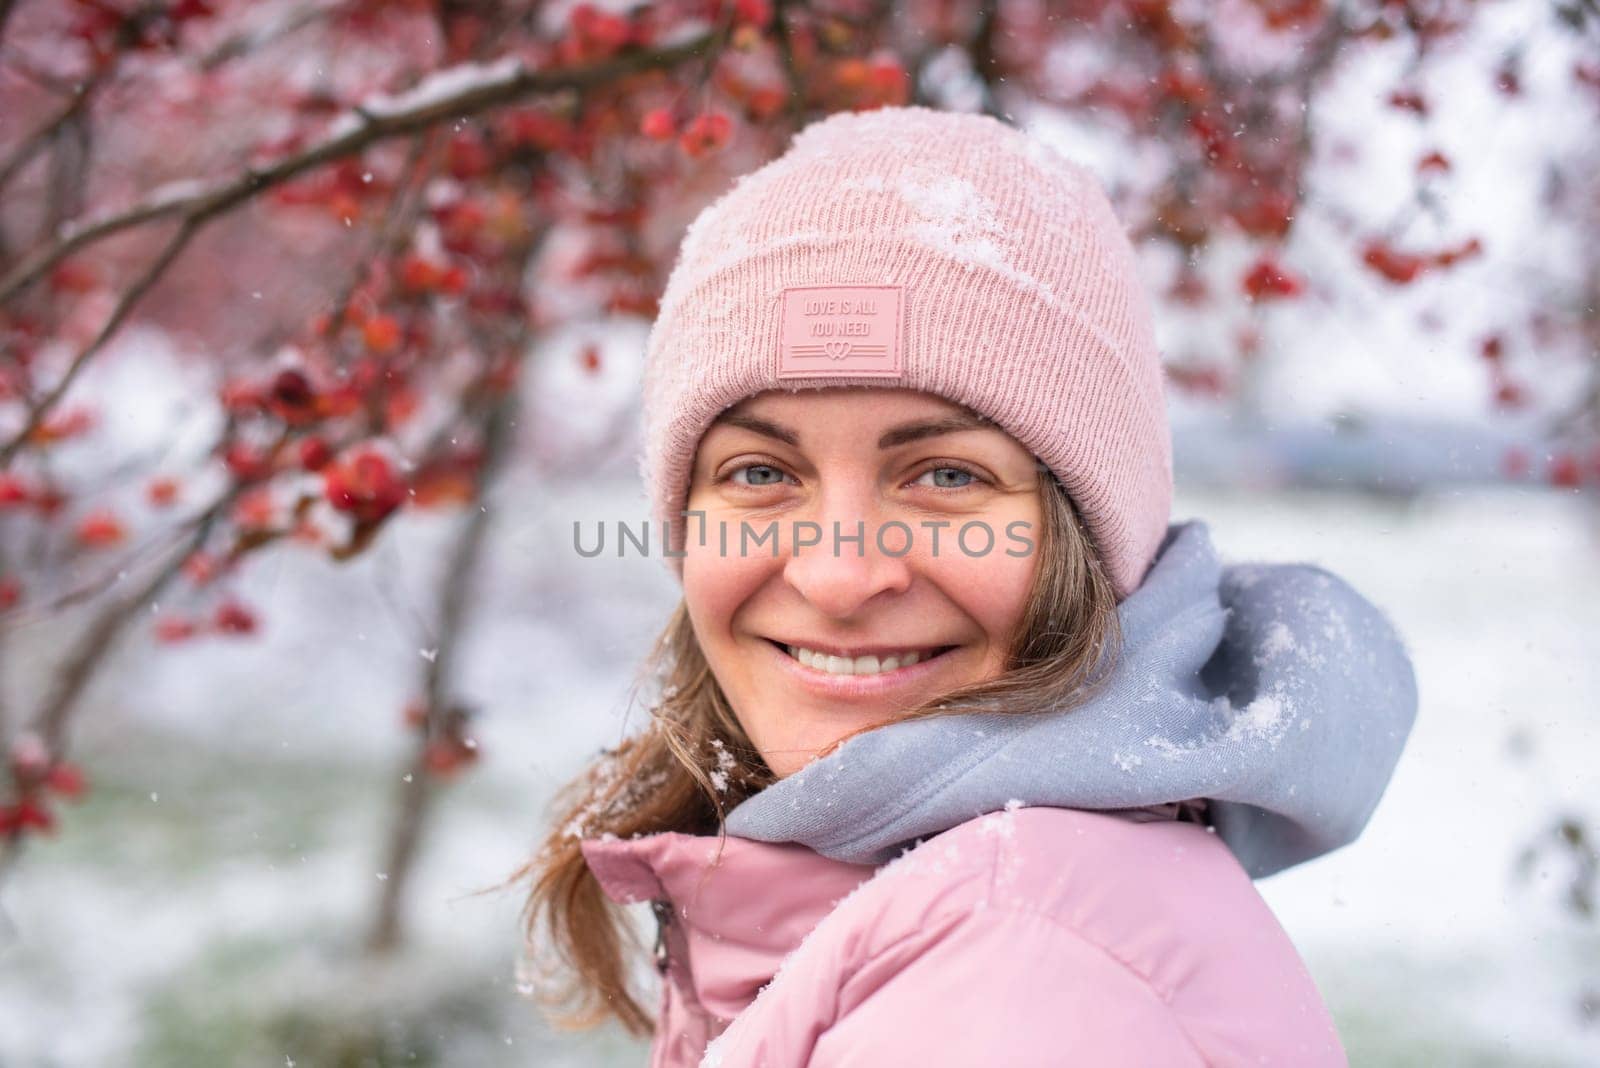 Winter Elegance: Portrait of a Beautiful Girl in a Snowy European Village. Winter lifestyle portrait of cheerful pretty girl. Smiling and having fun in the snow park. Snowflakes falling down. Christmas Radiance: Capturing Winter Elegance in the Snowy Ambiance of a European Village by Andrii_Ko